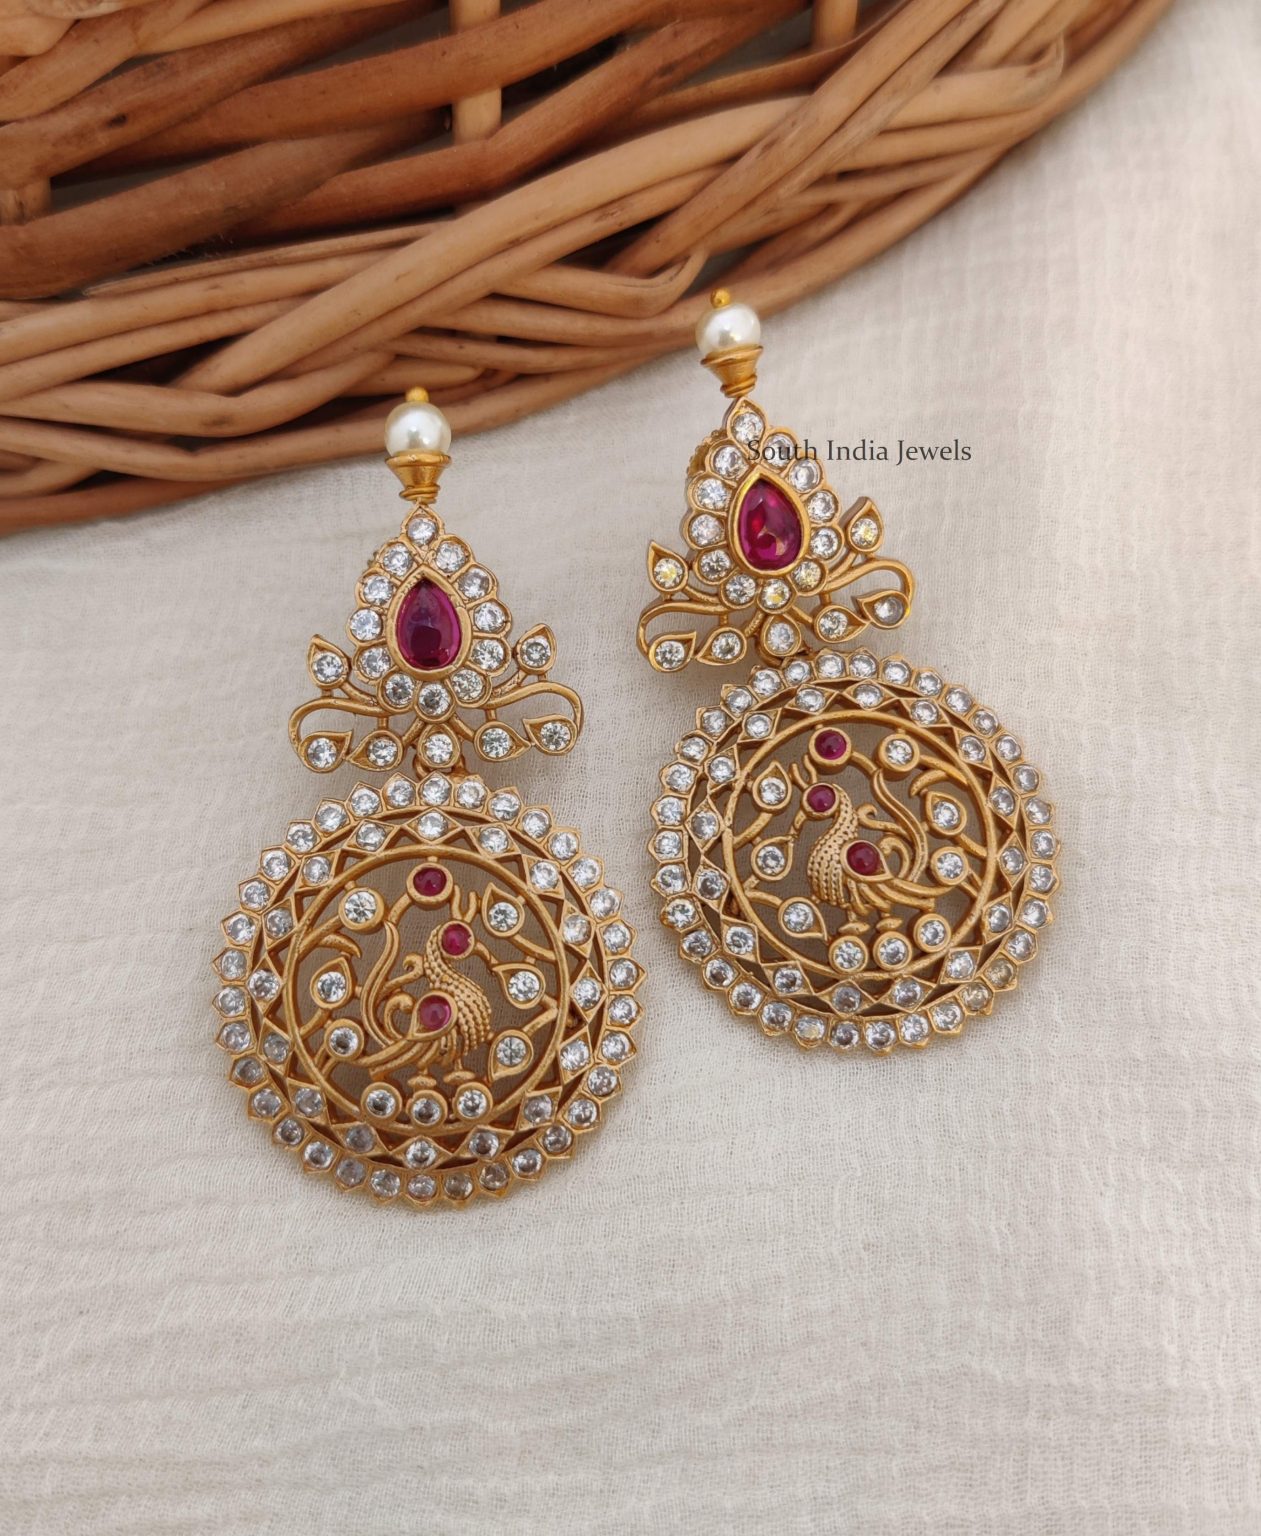 Peacock Design Earrings | AD Stone Earrings - South India Jewels